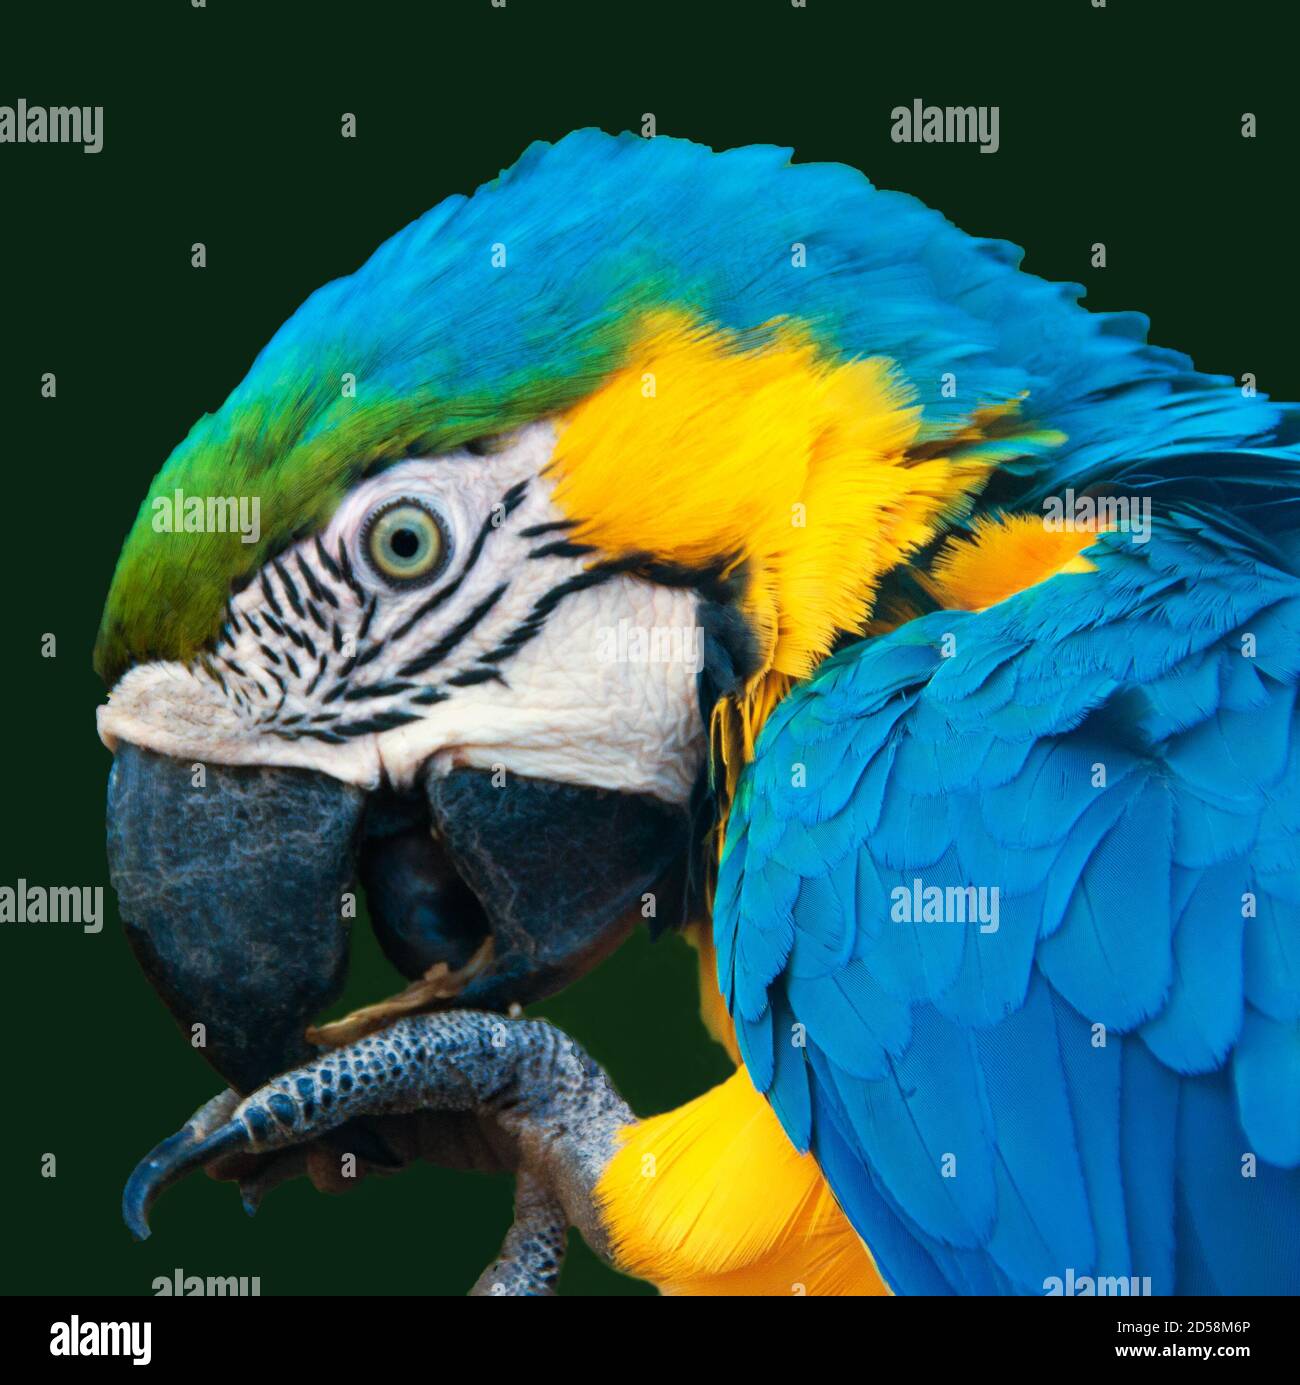 Close-up portrait of a parrot eating, South Africa Stock Photo